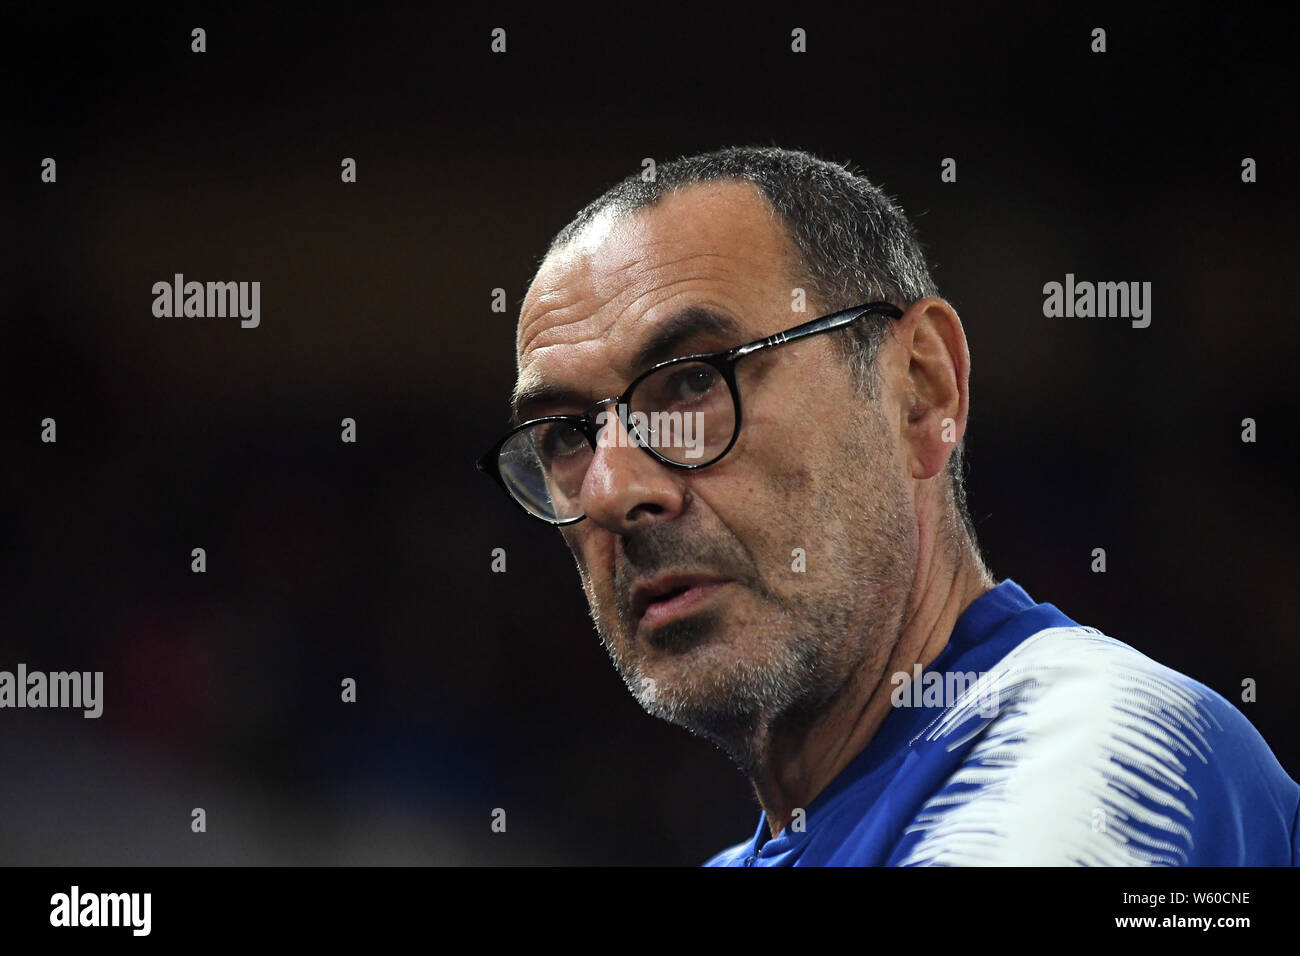 LONDON, ENGLAND - OCTOBER 4, 2018: Chelsea manager Maurizio Sarri pictured prior to the 2018/19 UEFA Europa League Group L game between Chelsea FC (England) and MOL Vidi FC (Hungary) at Stamford Bridge. Stock Photo